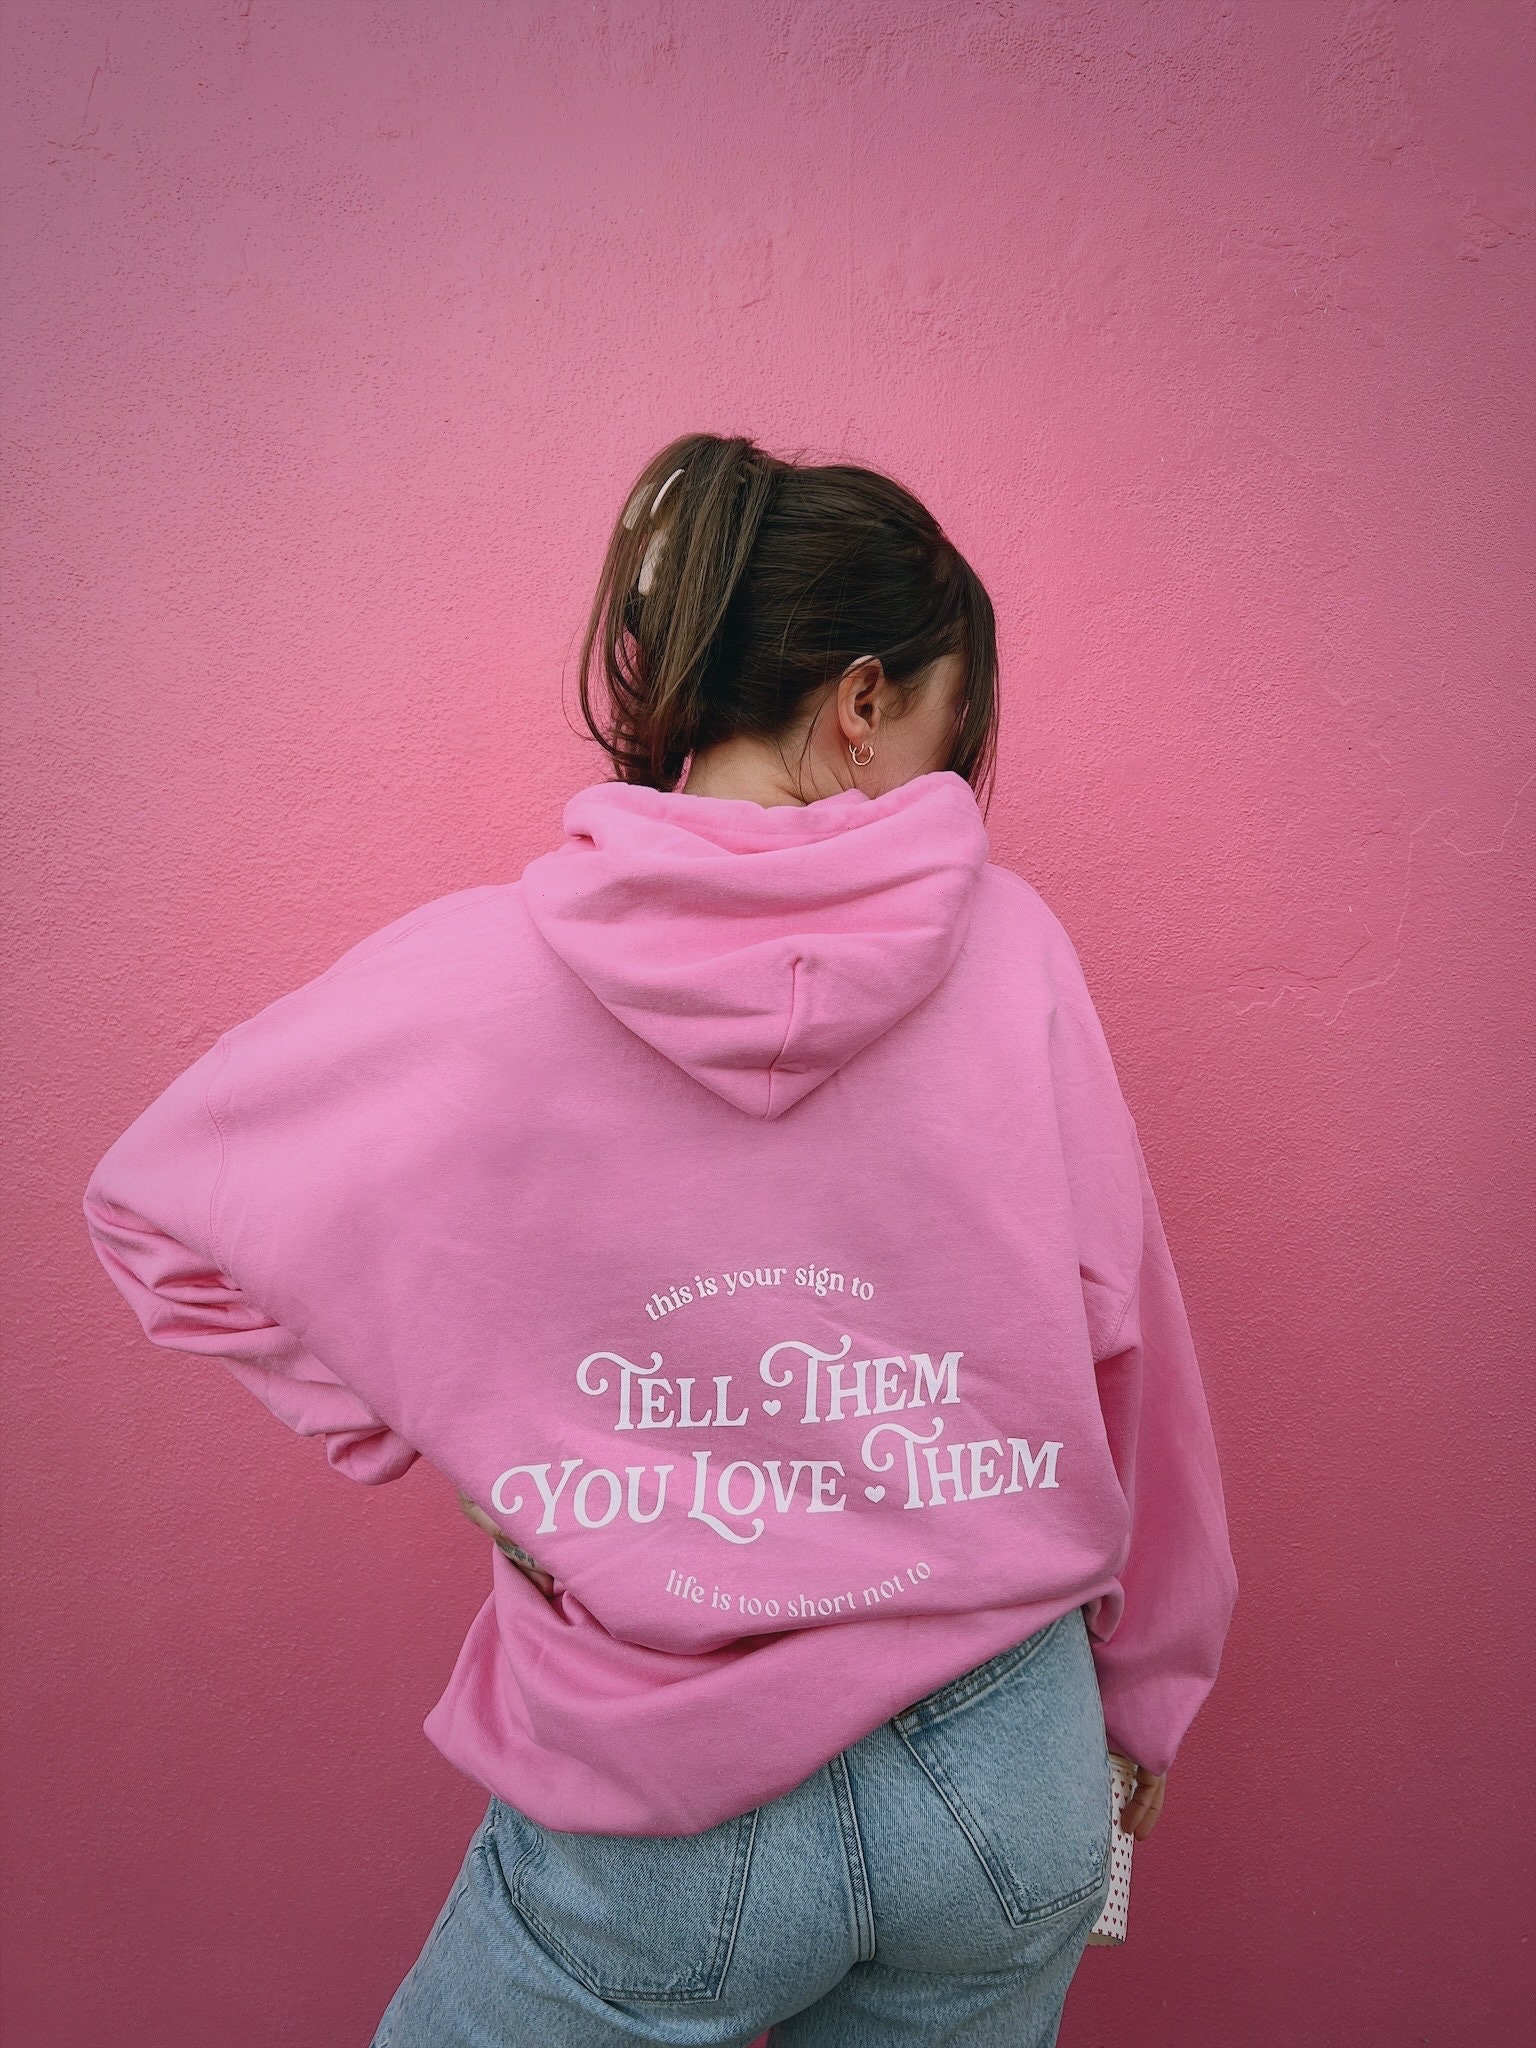 TELL THEM YOU LOVE THEM hoodie (pink) – thisisyoursign